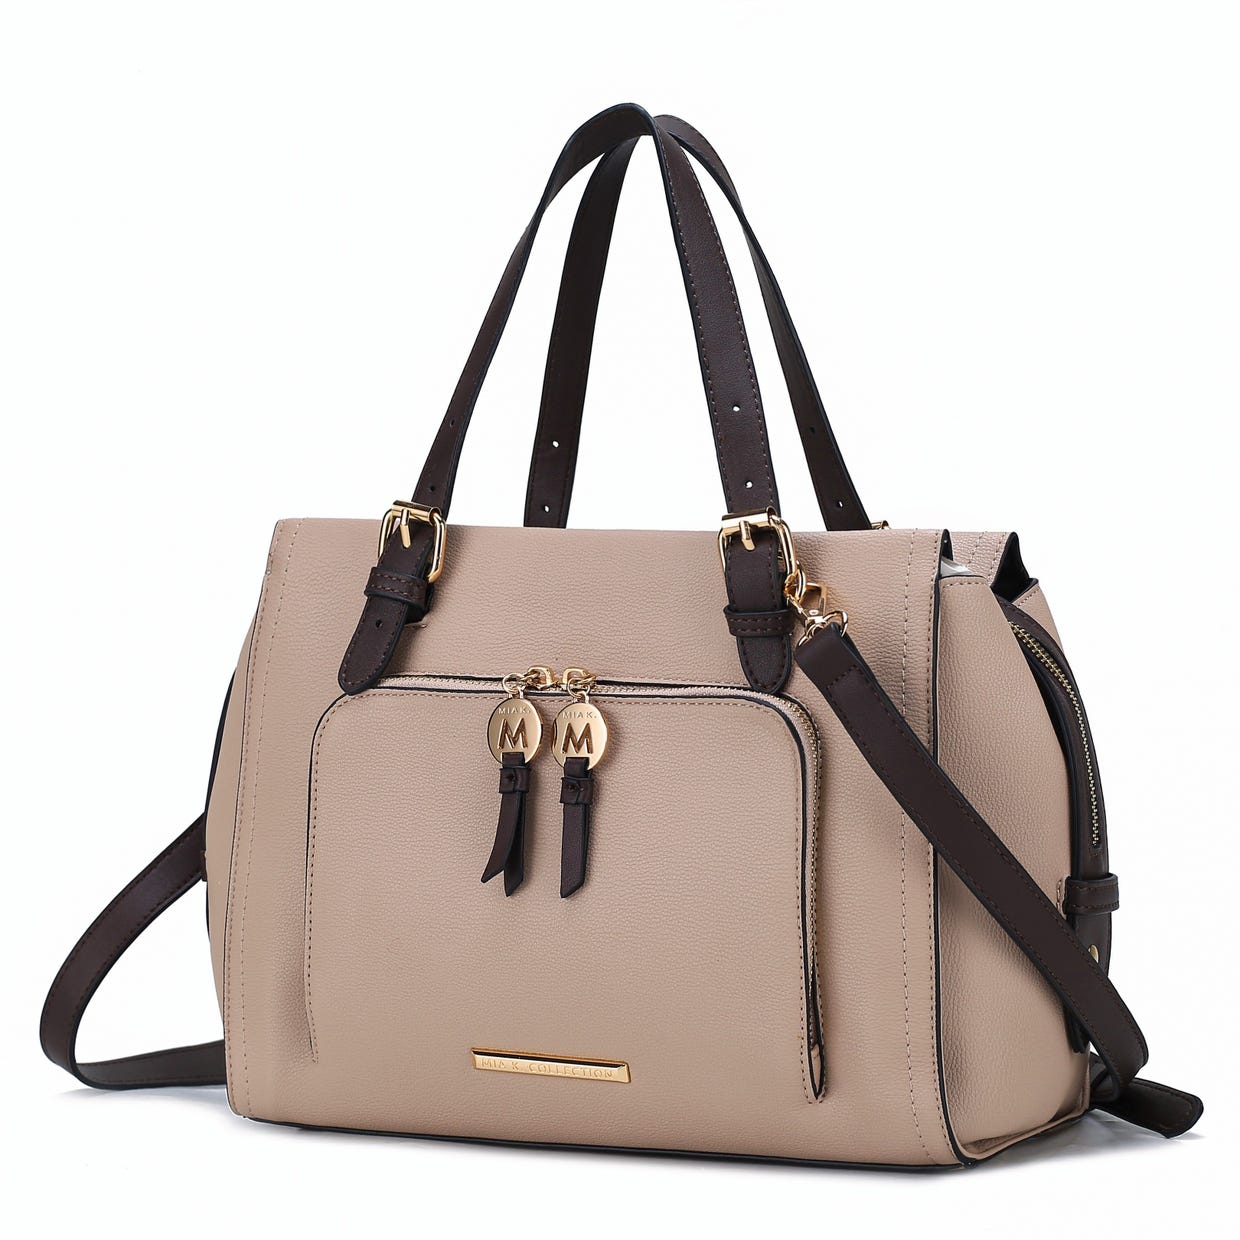 A taupe handbag with black handles, gold-tone hardware, and a detachable shoulder strap.